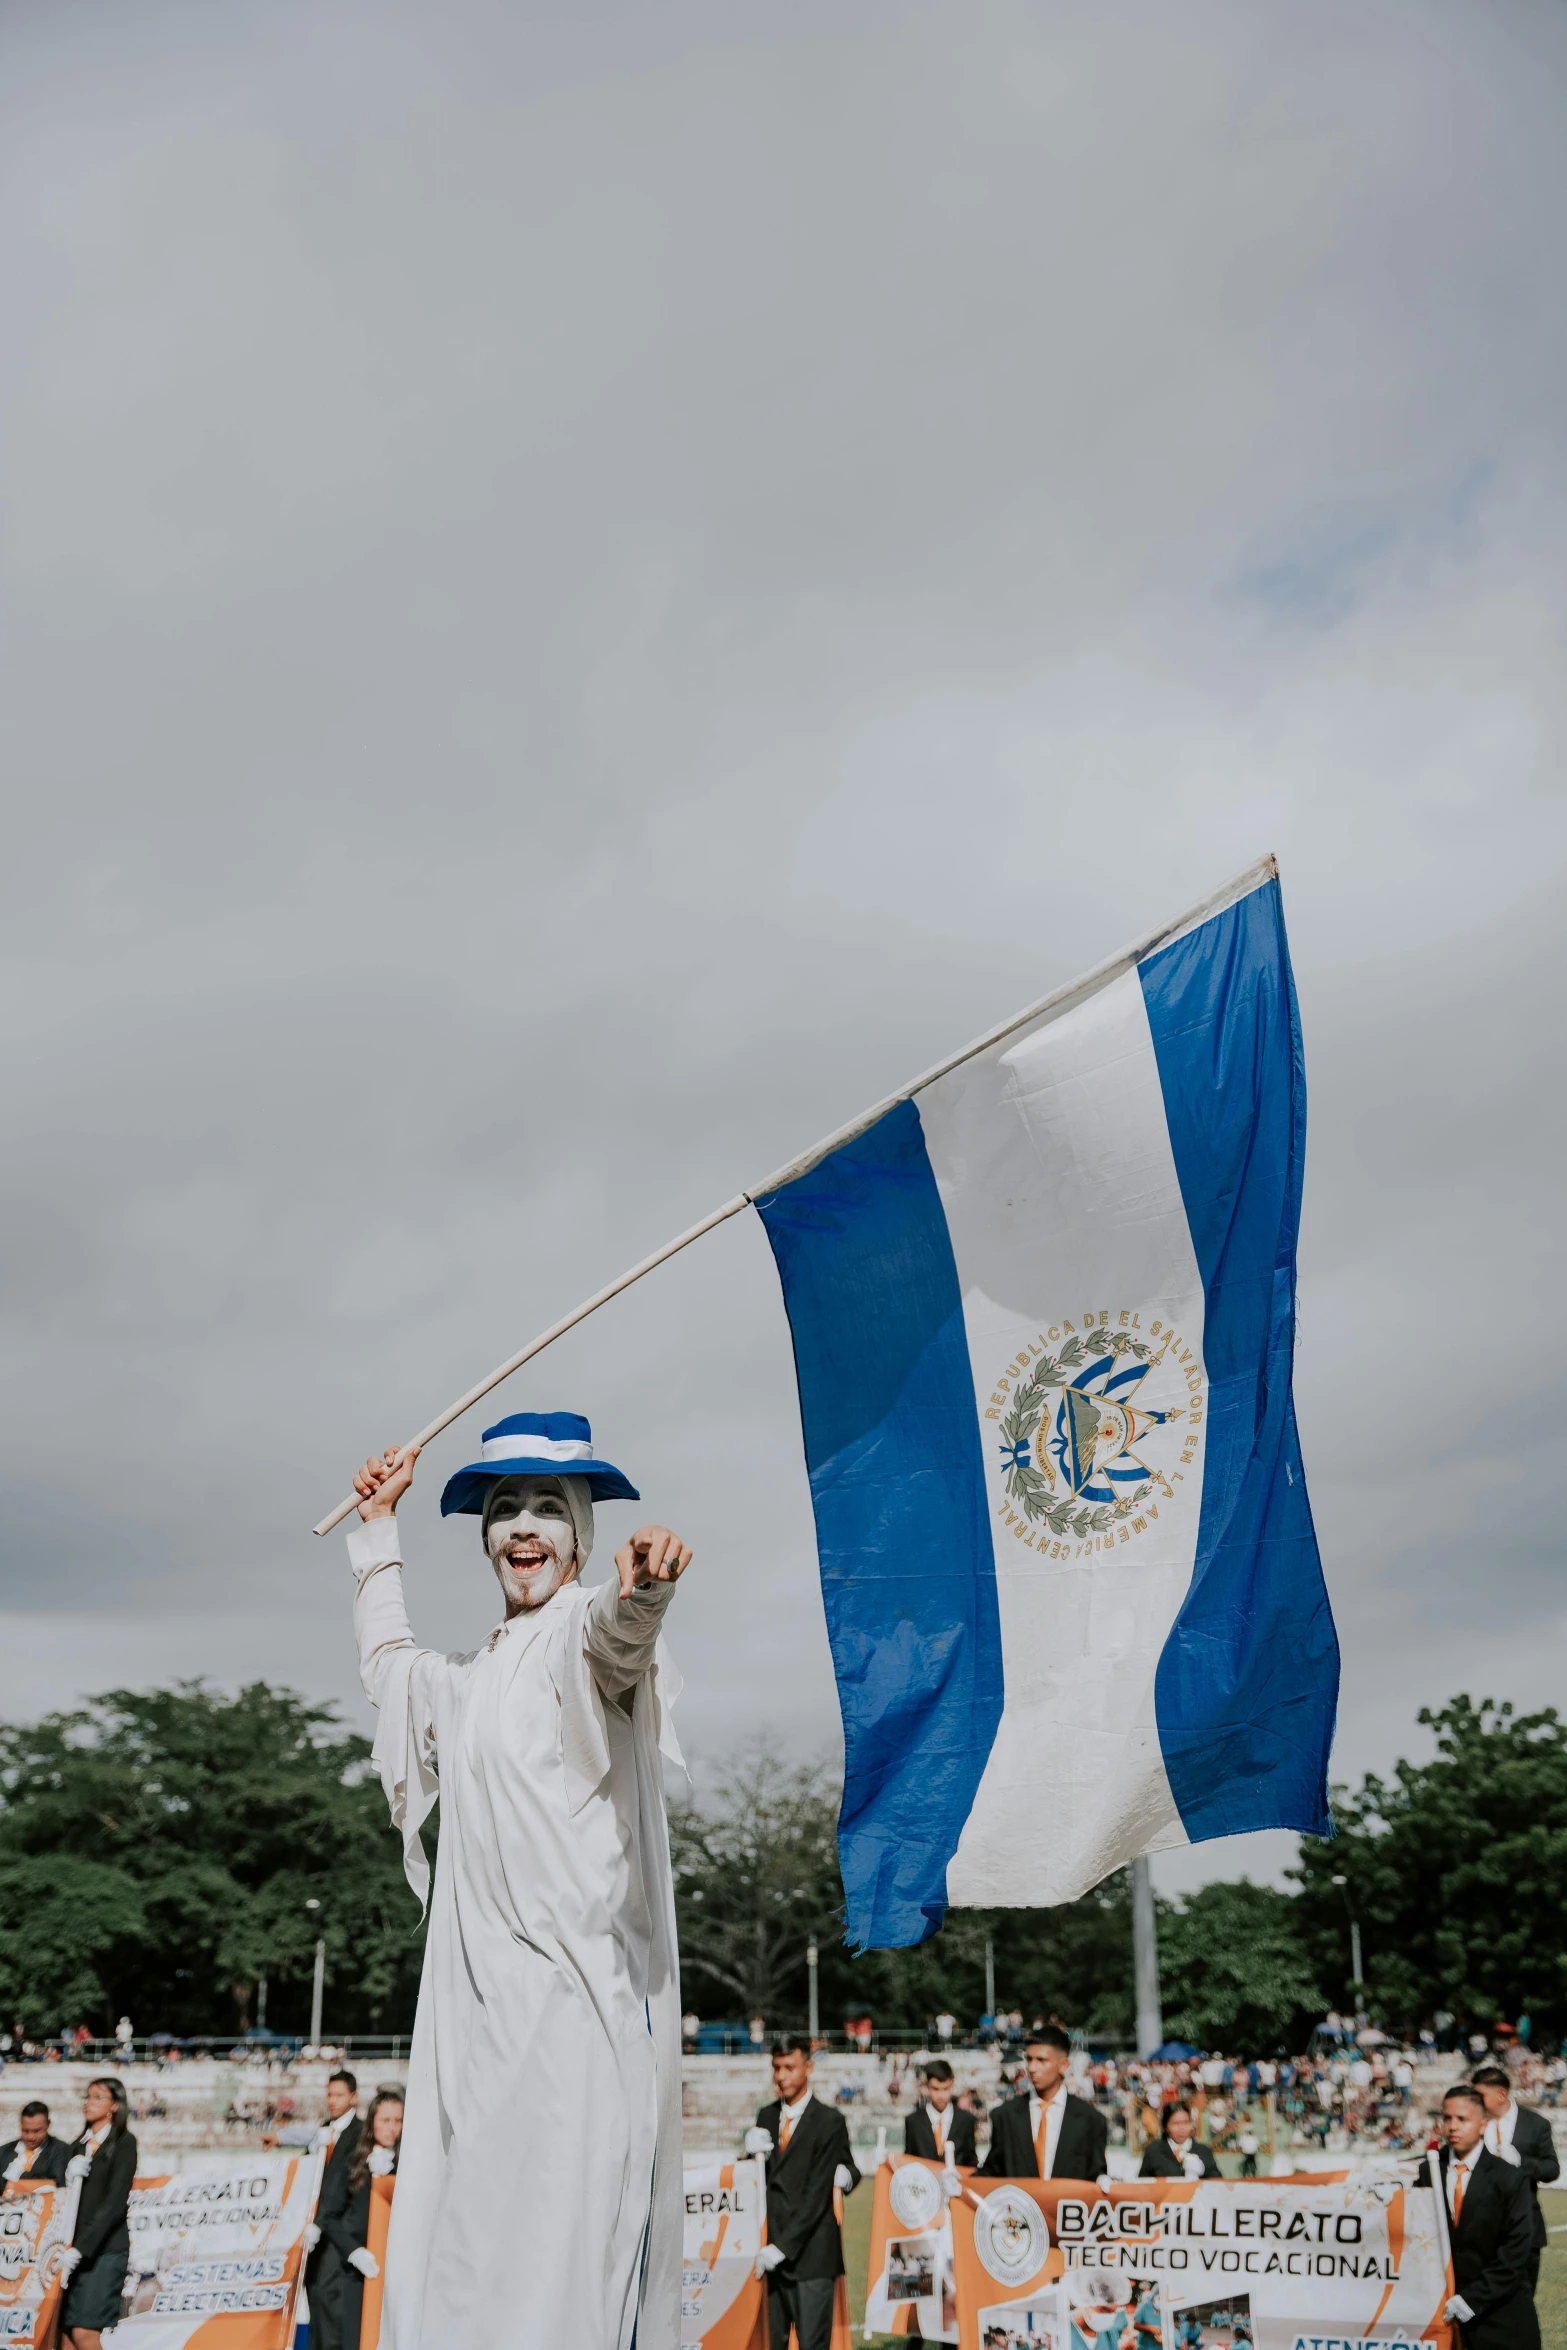 a person with white hair holding a flag